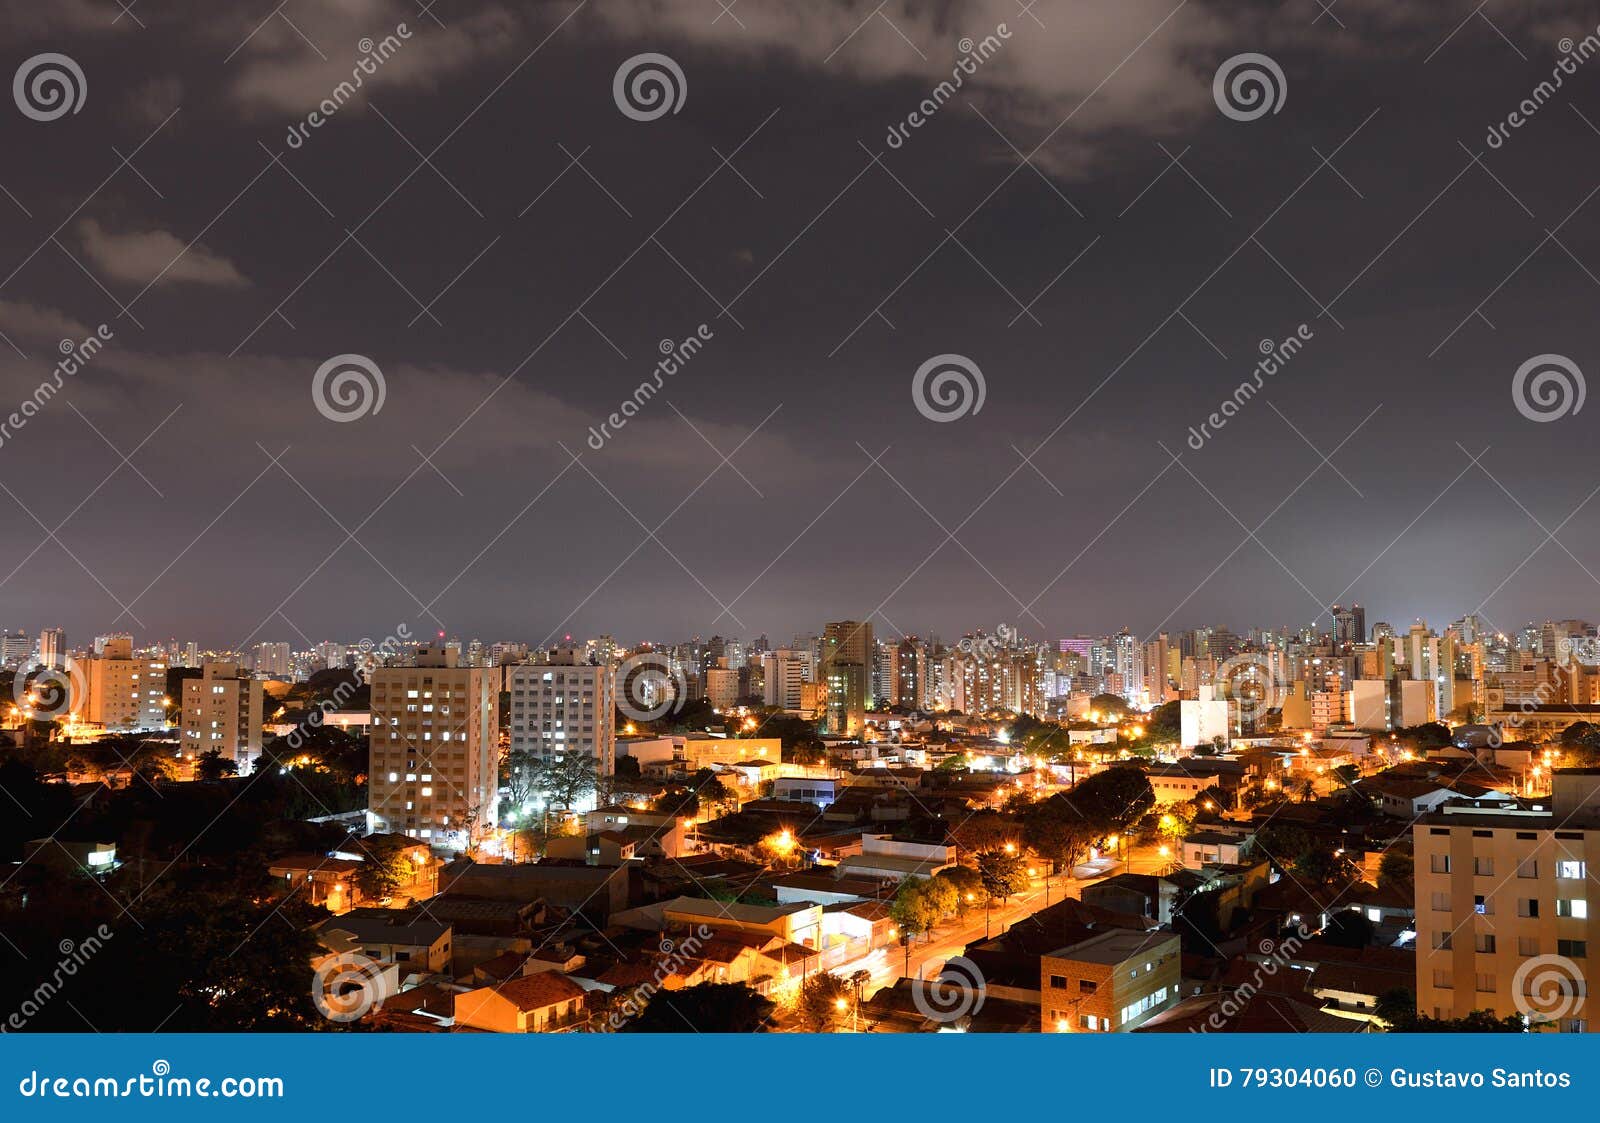 campinas at night from above , in brazil